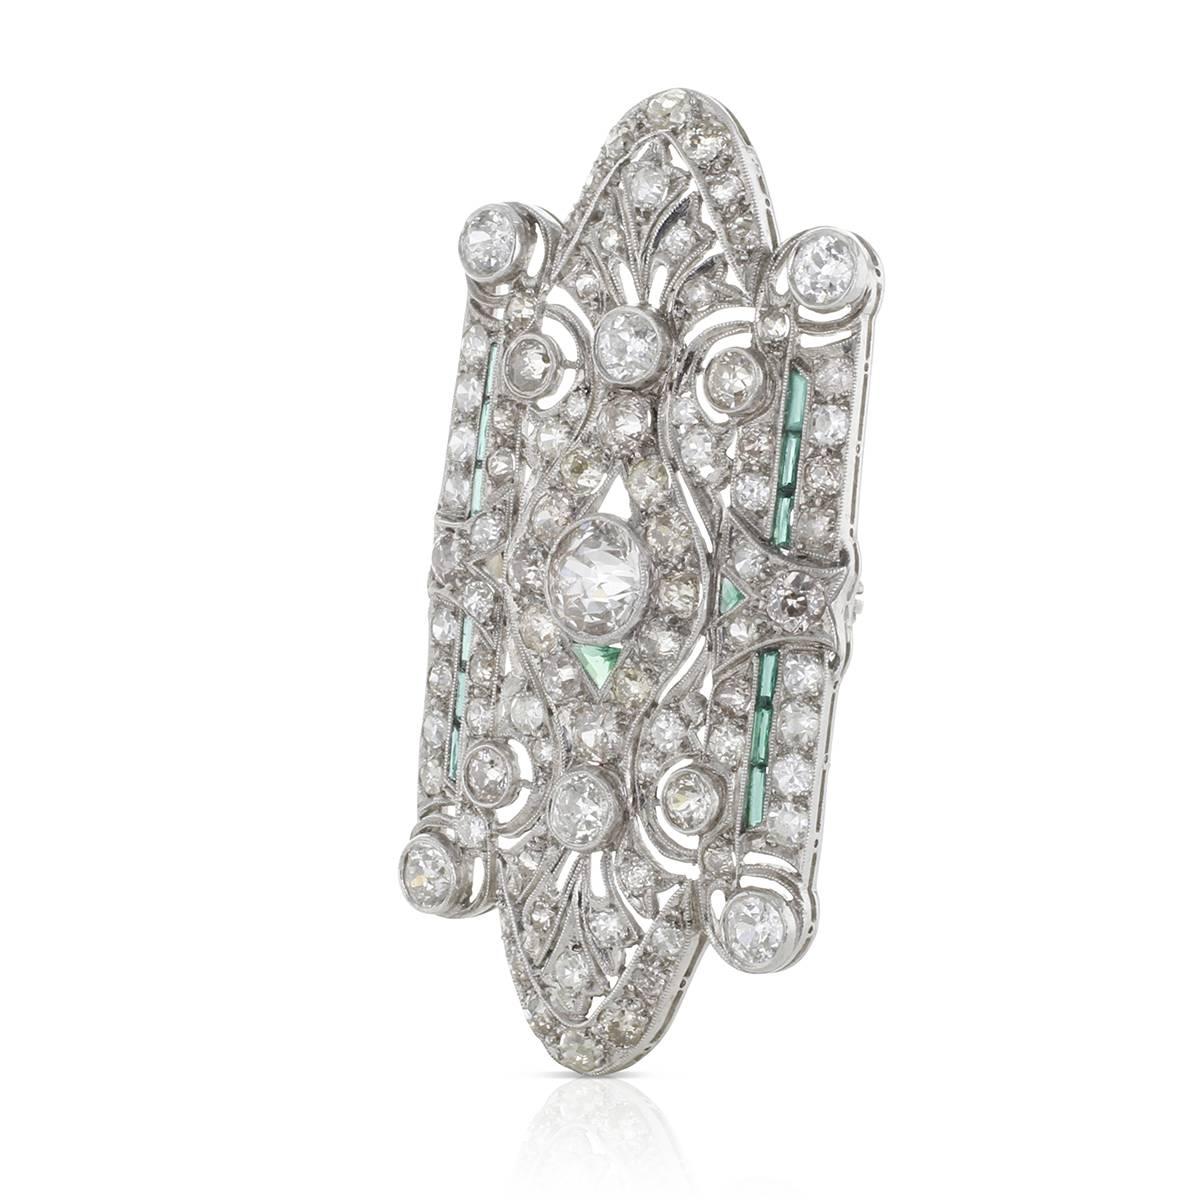 A 2 1/8 inch long oblique brooch expertly hand fabricated in platinum, circa 1930s, is set with vintage old minor cut round diamonds. Large diamond of over 1 carat sits proud in the center bezel adorned by small round diamond sparklers, all accented